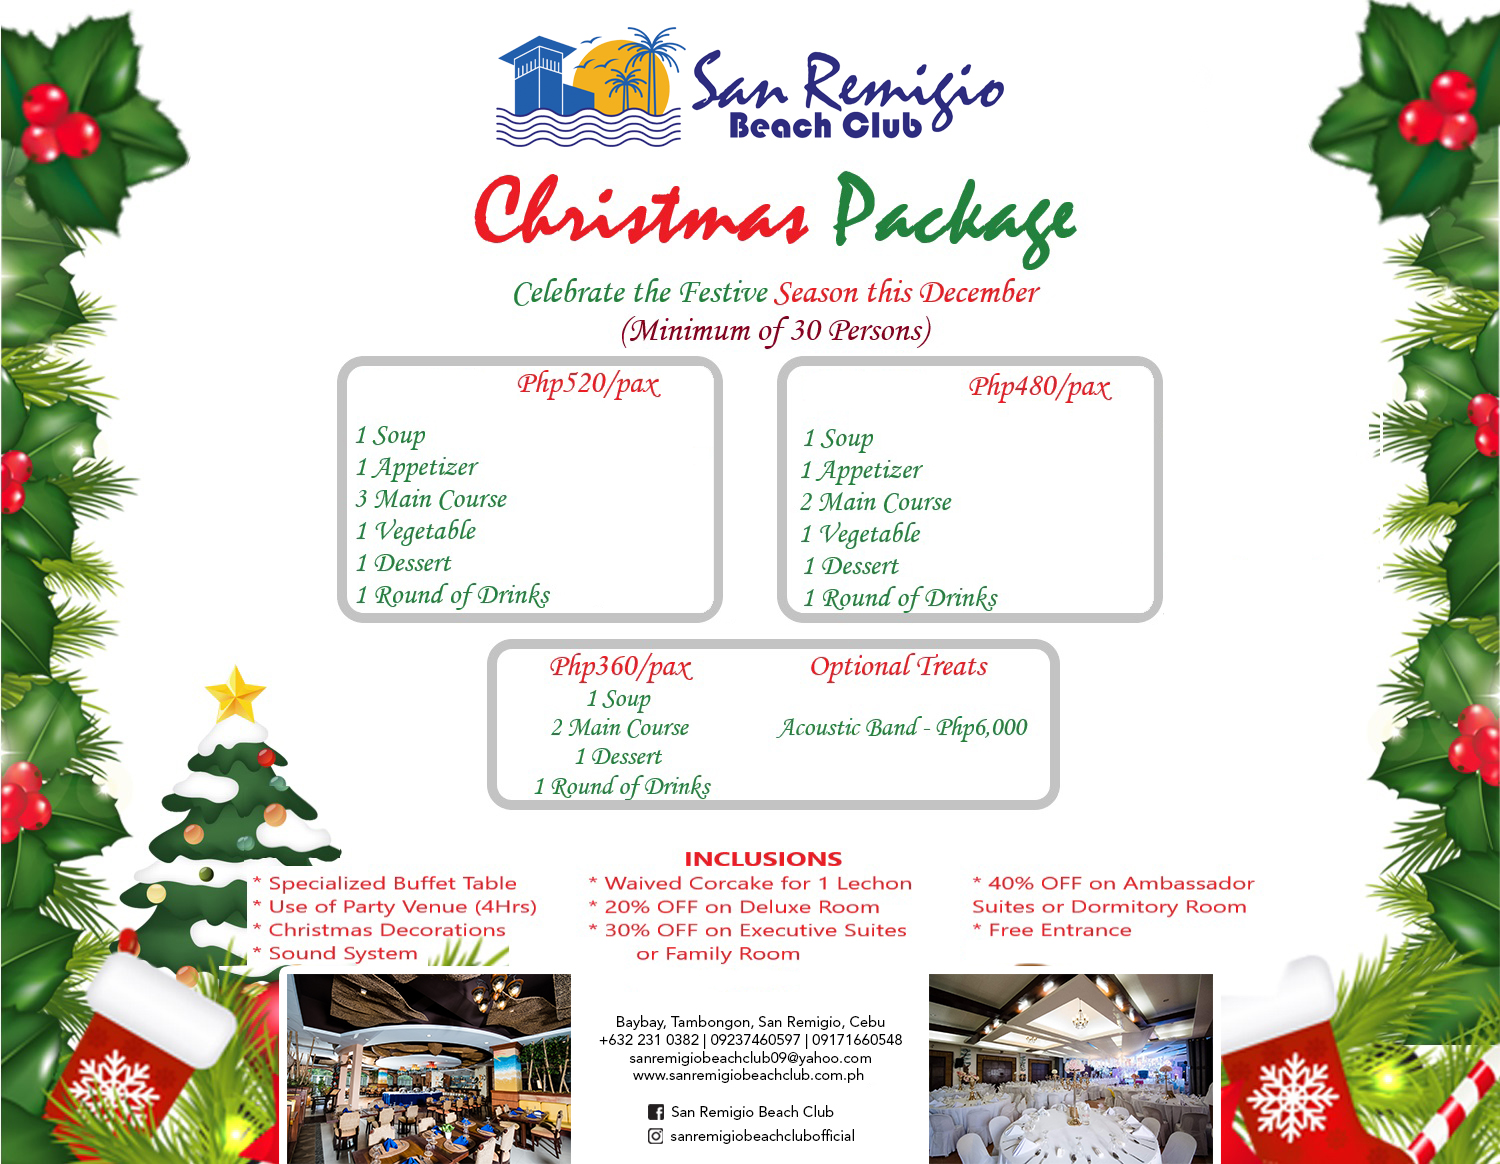 SRBC Final Christmas Package Layout edited